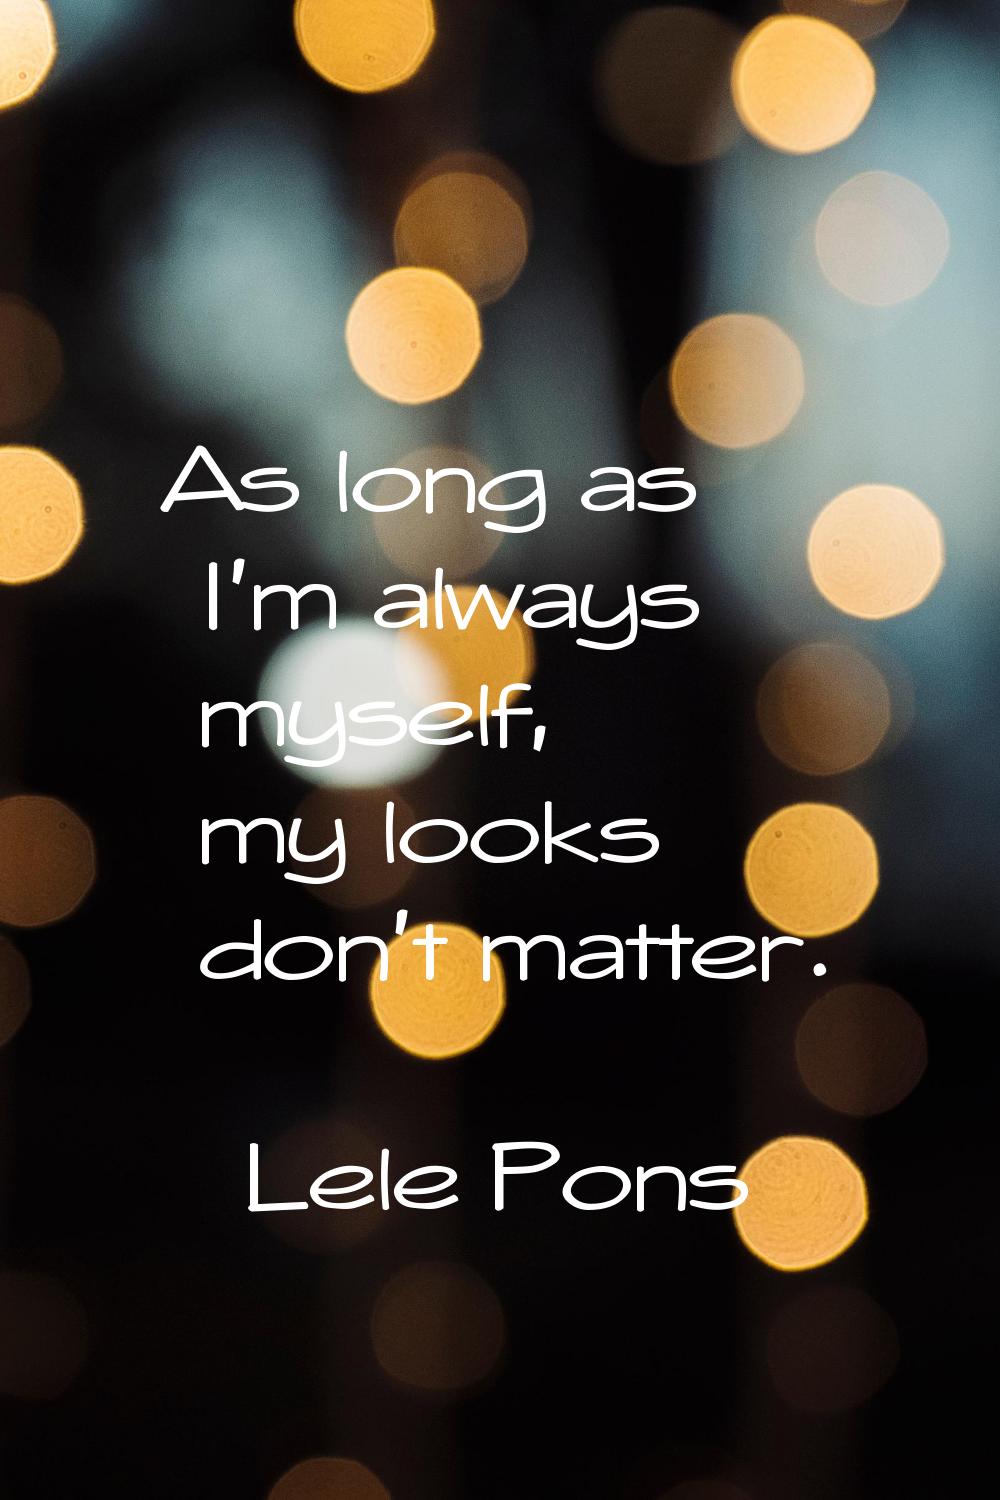 As long as I'm always myself, my looks don't matter.